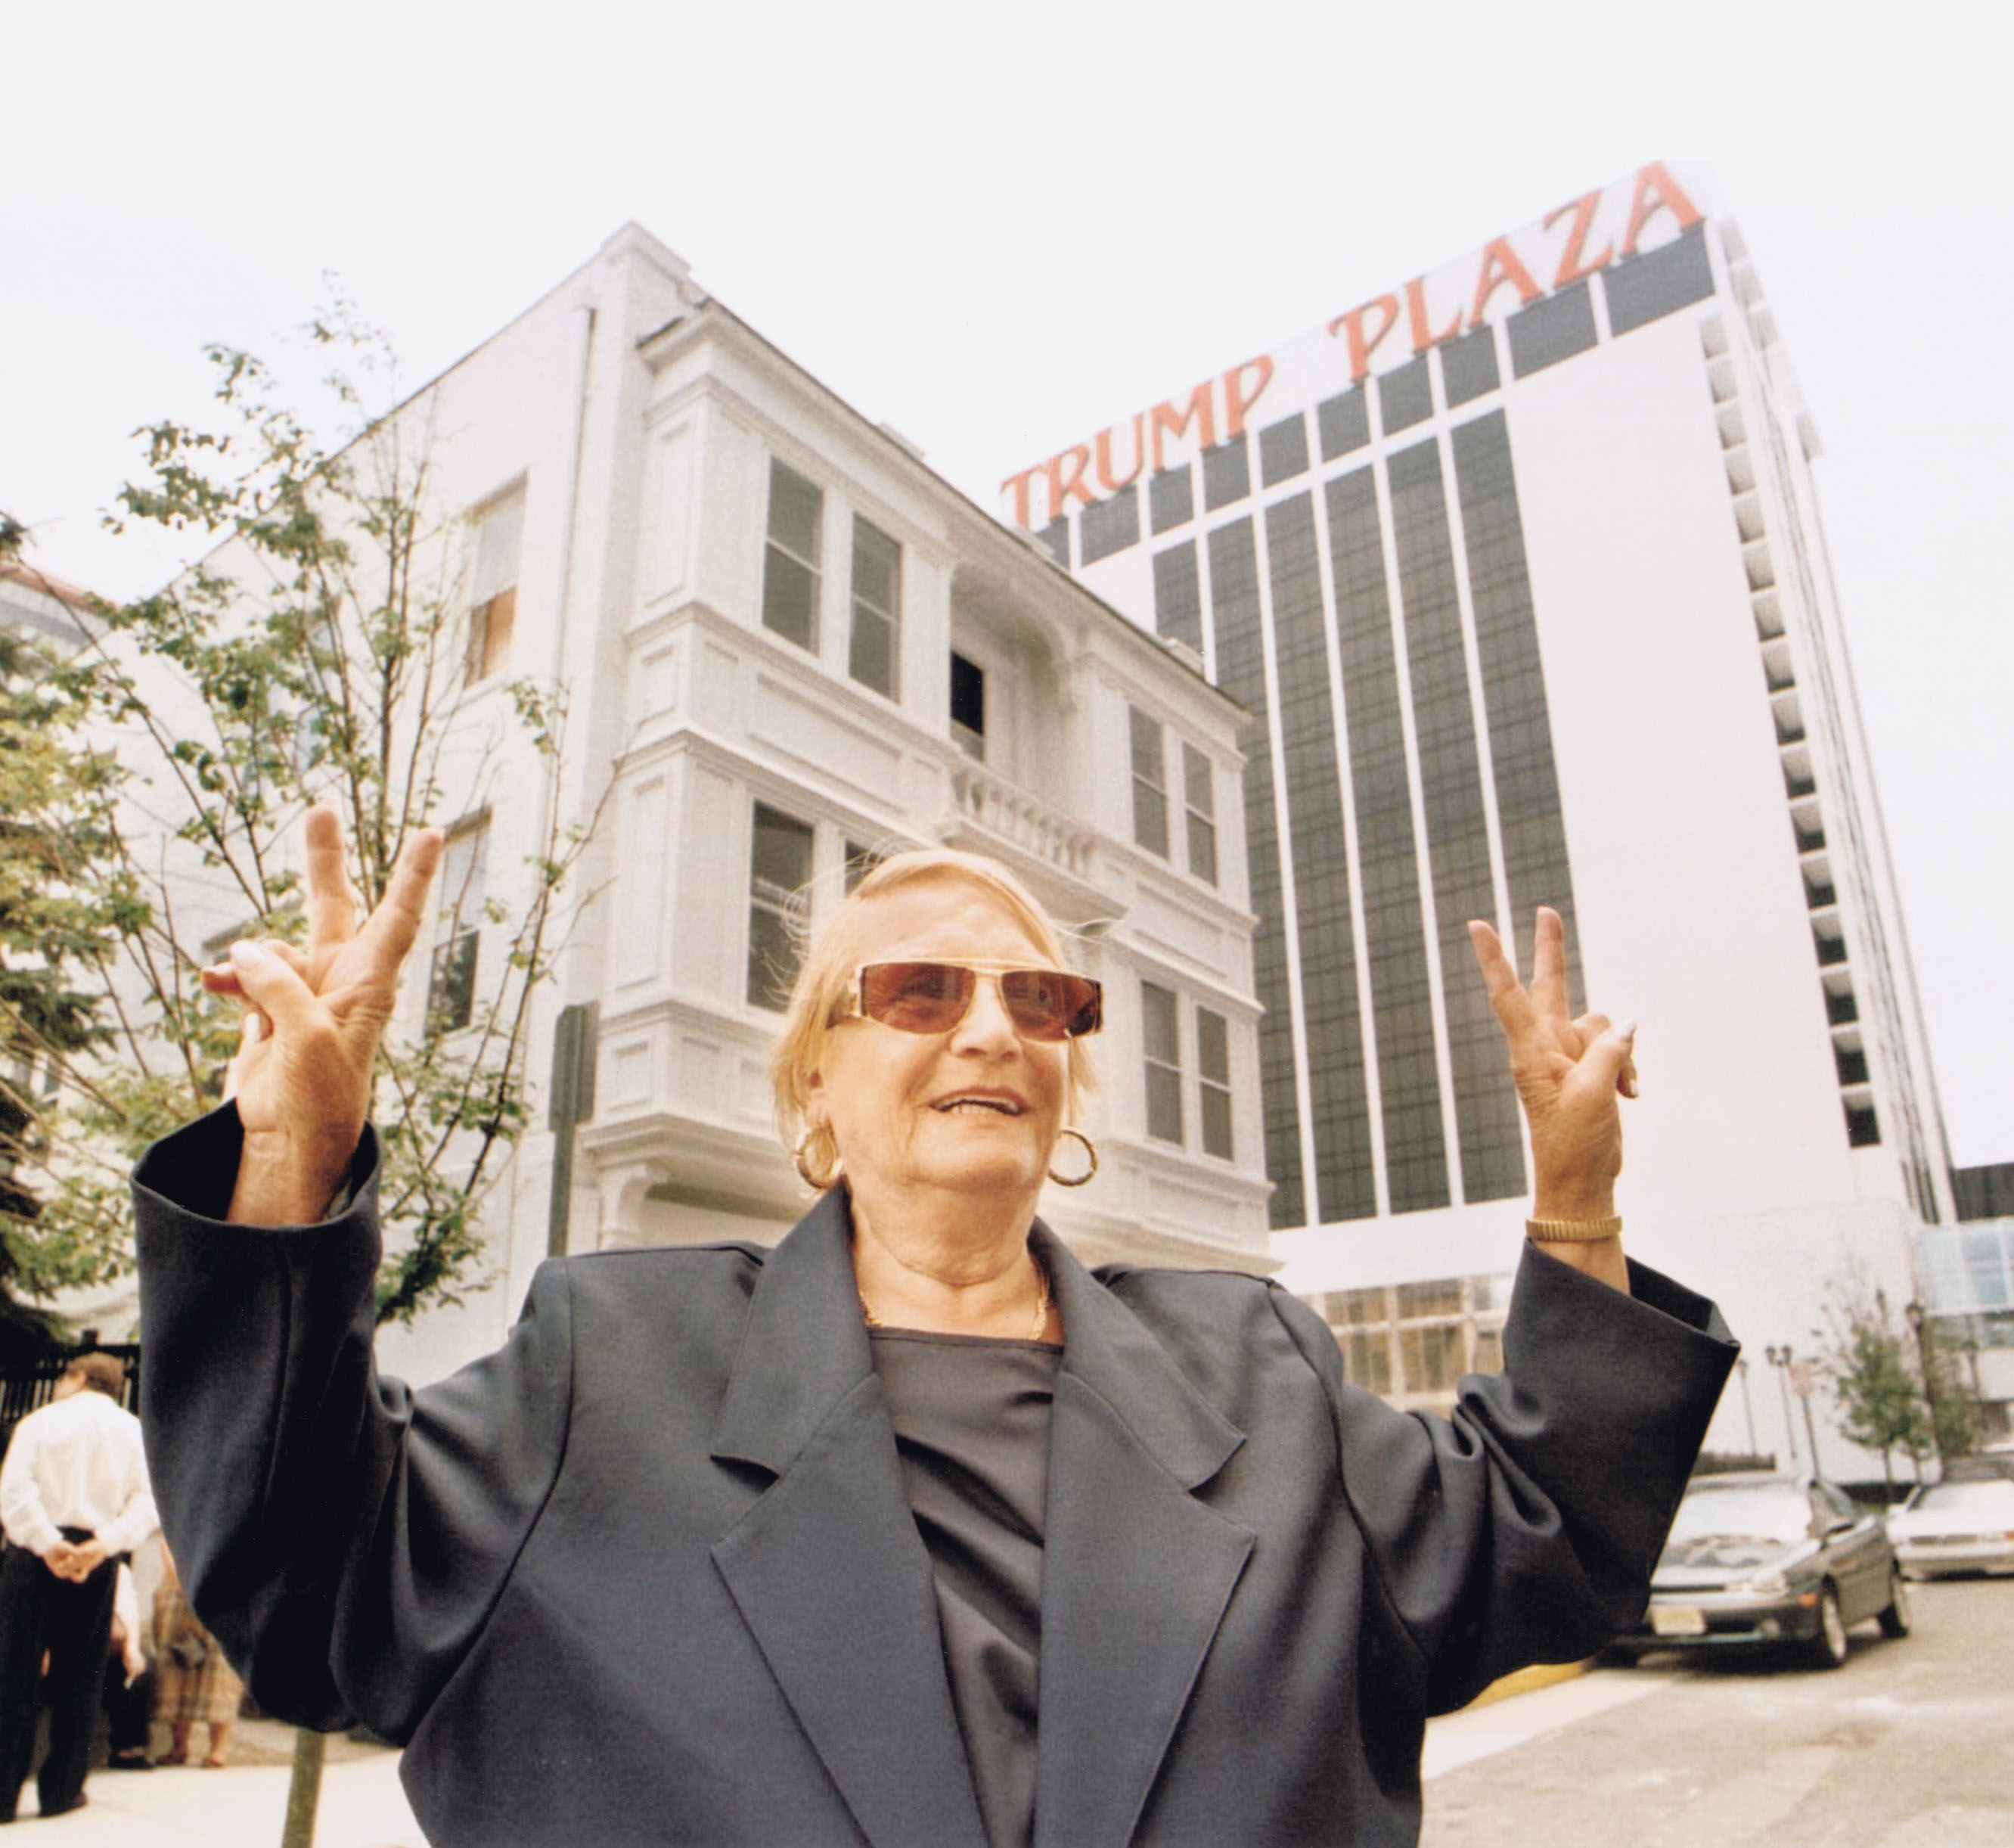 Vera Coking, who refused to sell her property to casino developers, gives the victory sign